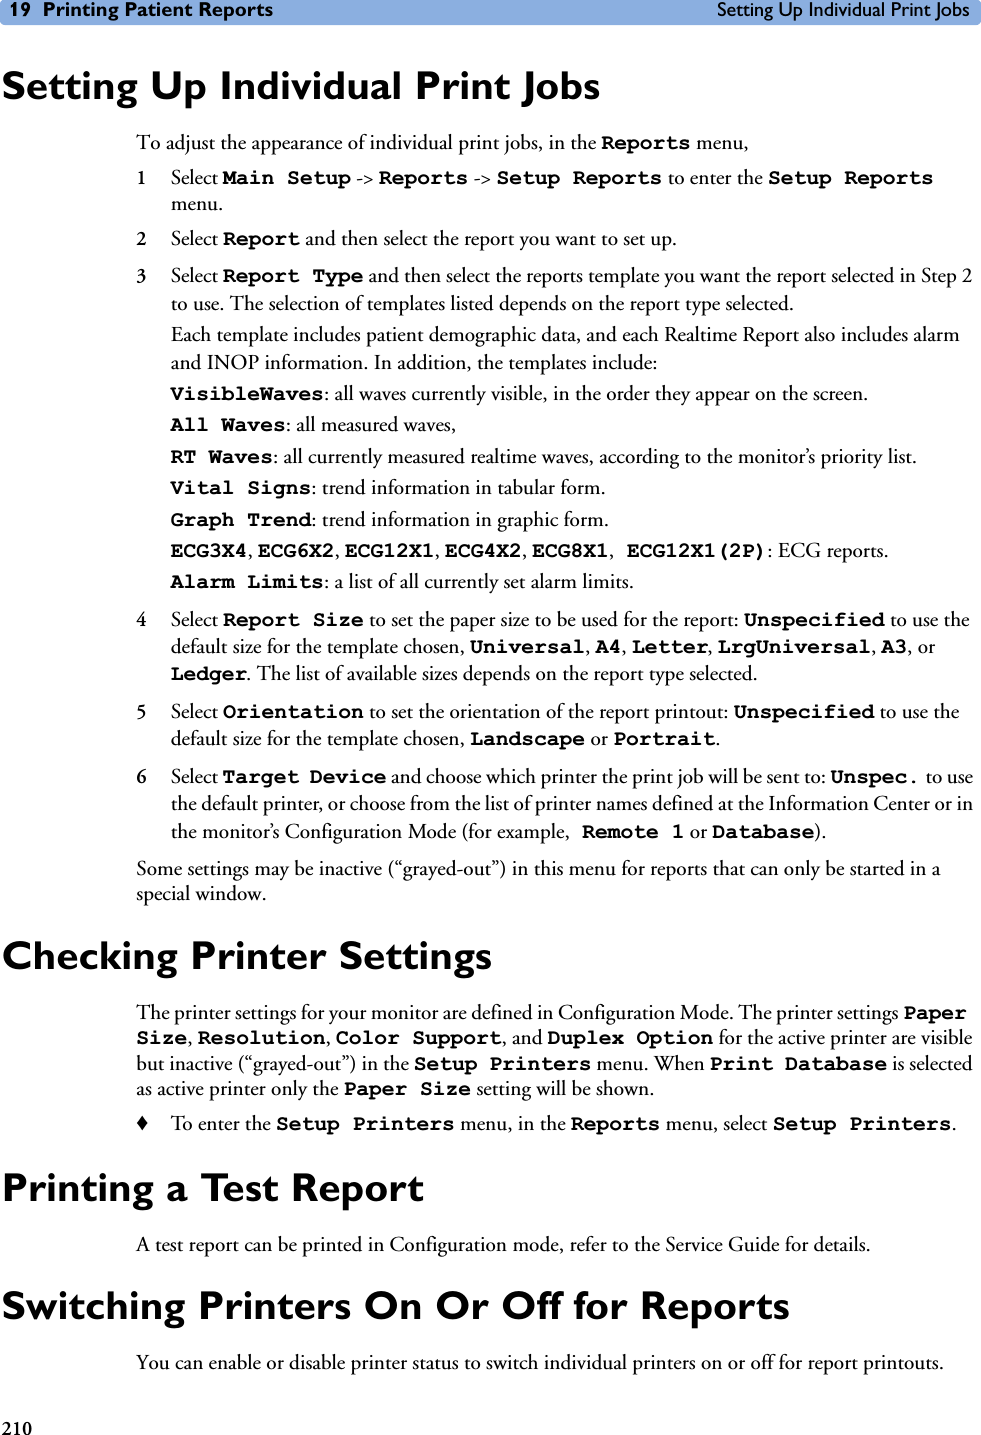 19 Printing Patient Reports Setting Up Individual Print Jobs210Setting Up Individual Print JobsTo adjust the appearance of individual print jobs, in the Reports menu, 1Select Main Setup -&gt; Reports -&gt; Setup Reports to enter the Setup Reports menu.2Select Report and then select the report you want to set up. 3Select Report Type and then select the reports template you want the report selected in Step 2 to use. The selection of templates listed depends on the report type selected. Each template includes patient demographic data, and each Realtime Report also includes alarm and INOP information. In addition, the templates include:VisibleWaves: all waves currently visible, in the order they appear on the screen.All Waves: all measured waves,RT Waves: all currently measured realtime waves, according to the monitor’s priority list.Vital Signs: trend information in tabular form.Graph Trend: trend information in graphic form.ECG3X4, ECG6X2, ECG12X1, ECG4X2, ECG8X1, ECG12X1(2P): ECG reports.Alarm Limits: a list of all currently set alarm limits.4Select Report Size to set the paper size to be used for the report: Unspecified to use the default size for the template chosen, Universal, A4, Letter, LrgUniversal, A3, or Ledger. The list of available sizes depends on the report type selected.5Select Orientation to set the orientation of the report printout: Unspecified to use the default size for the template chosen, Landscape or Portrait.6Select Target Device and choose which printer the print job will be sent to: Unspec. to use the default printer, or choose from the list of printer names defined at the Information Center or in the monitor’s Configuration Mode (for example, Remote 1 or Database). Some settings may be inactive (“grayed-out”) in this menu for reports that can only be started in a special window.Checking Printer Settings The printer settings for your monitor are defined in Configuration Mode. The printer settings Paper Size, Resolution, Color Support, and Duplex Option for the active printer are visible but inactive (“grayed-out”) in the Setup Printers menu. When Print Database is selected as active printer only the Paper Size setting will be shown. ♦To enter the Setup Printers menu, in the Reports menu, select Setup Printers.Printing a Test ReportA test report can be printed in Configuration mode, refer to the Service Guide for details.Switching Printers On Or Off for ReportsYou can enable or disable printer status to switch individual printers on or off for report printouts. 